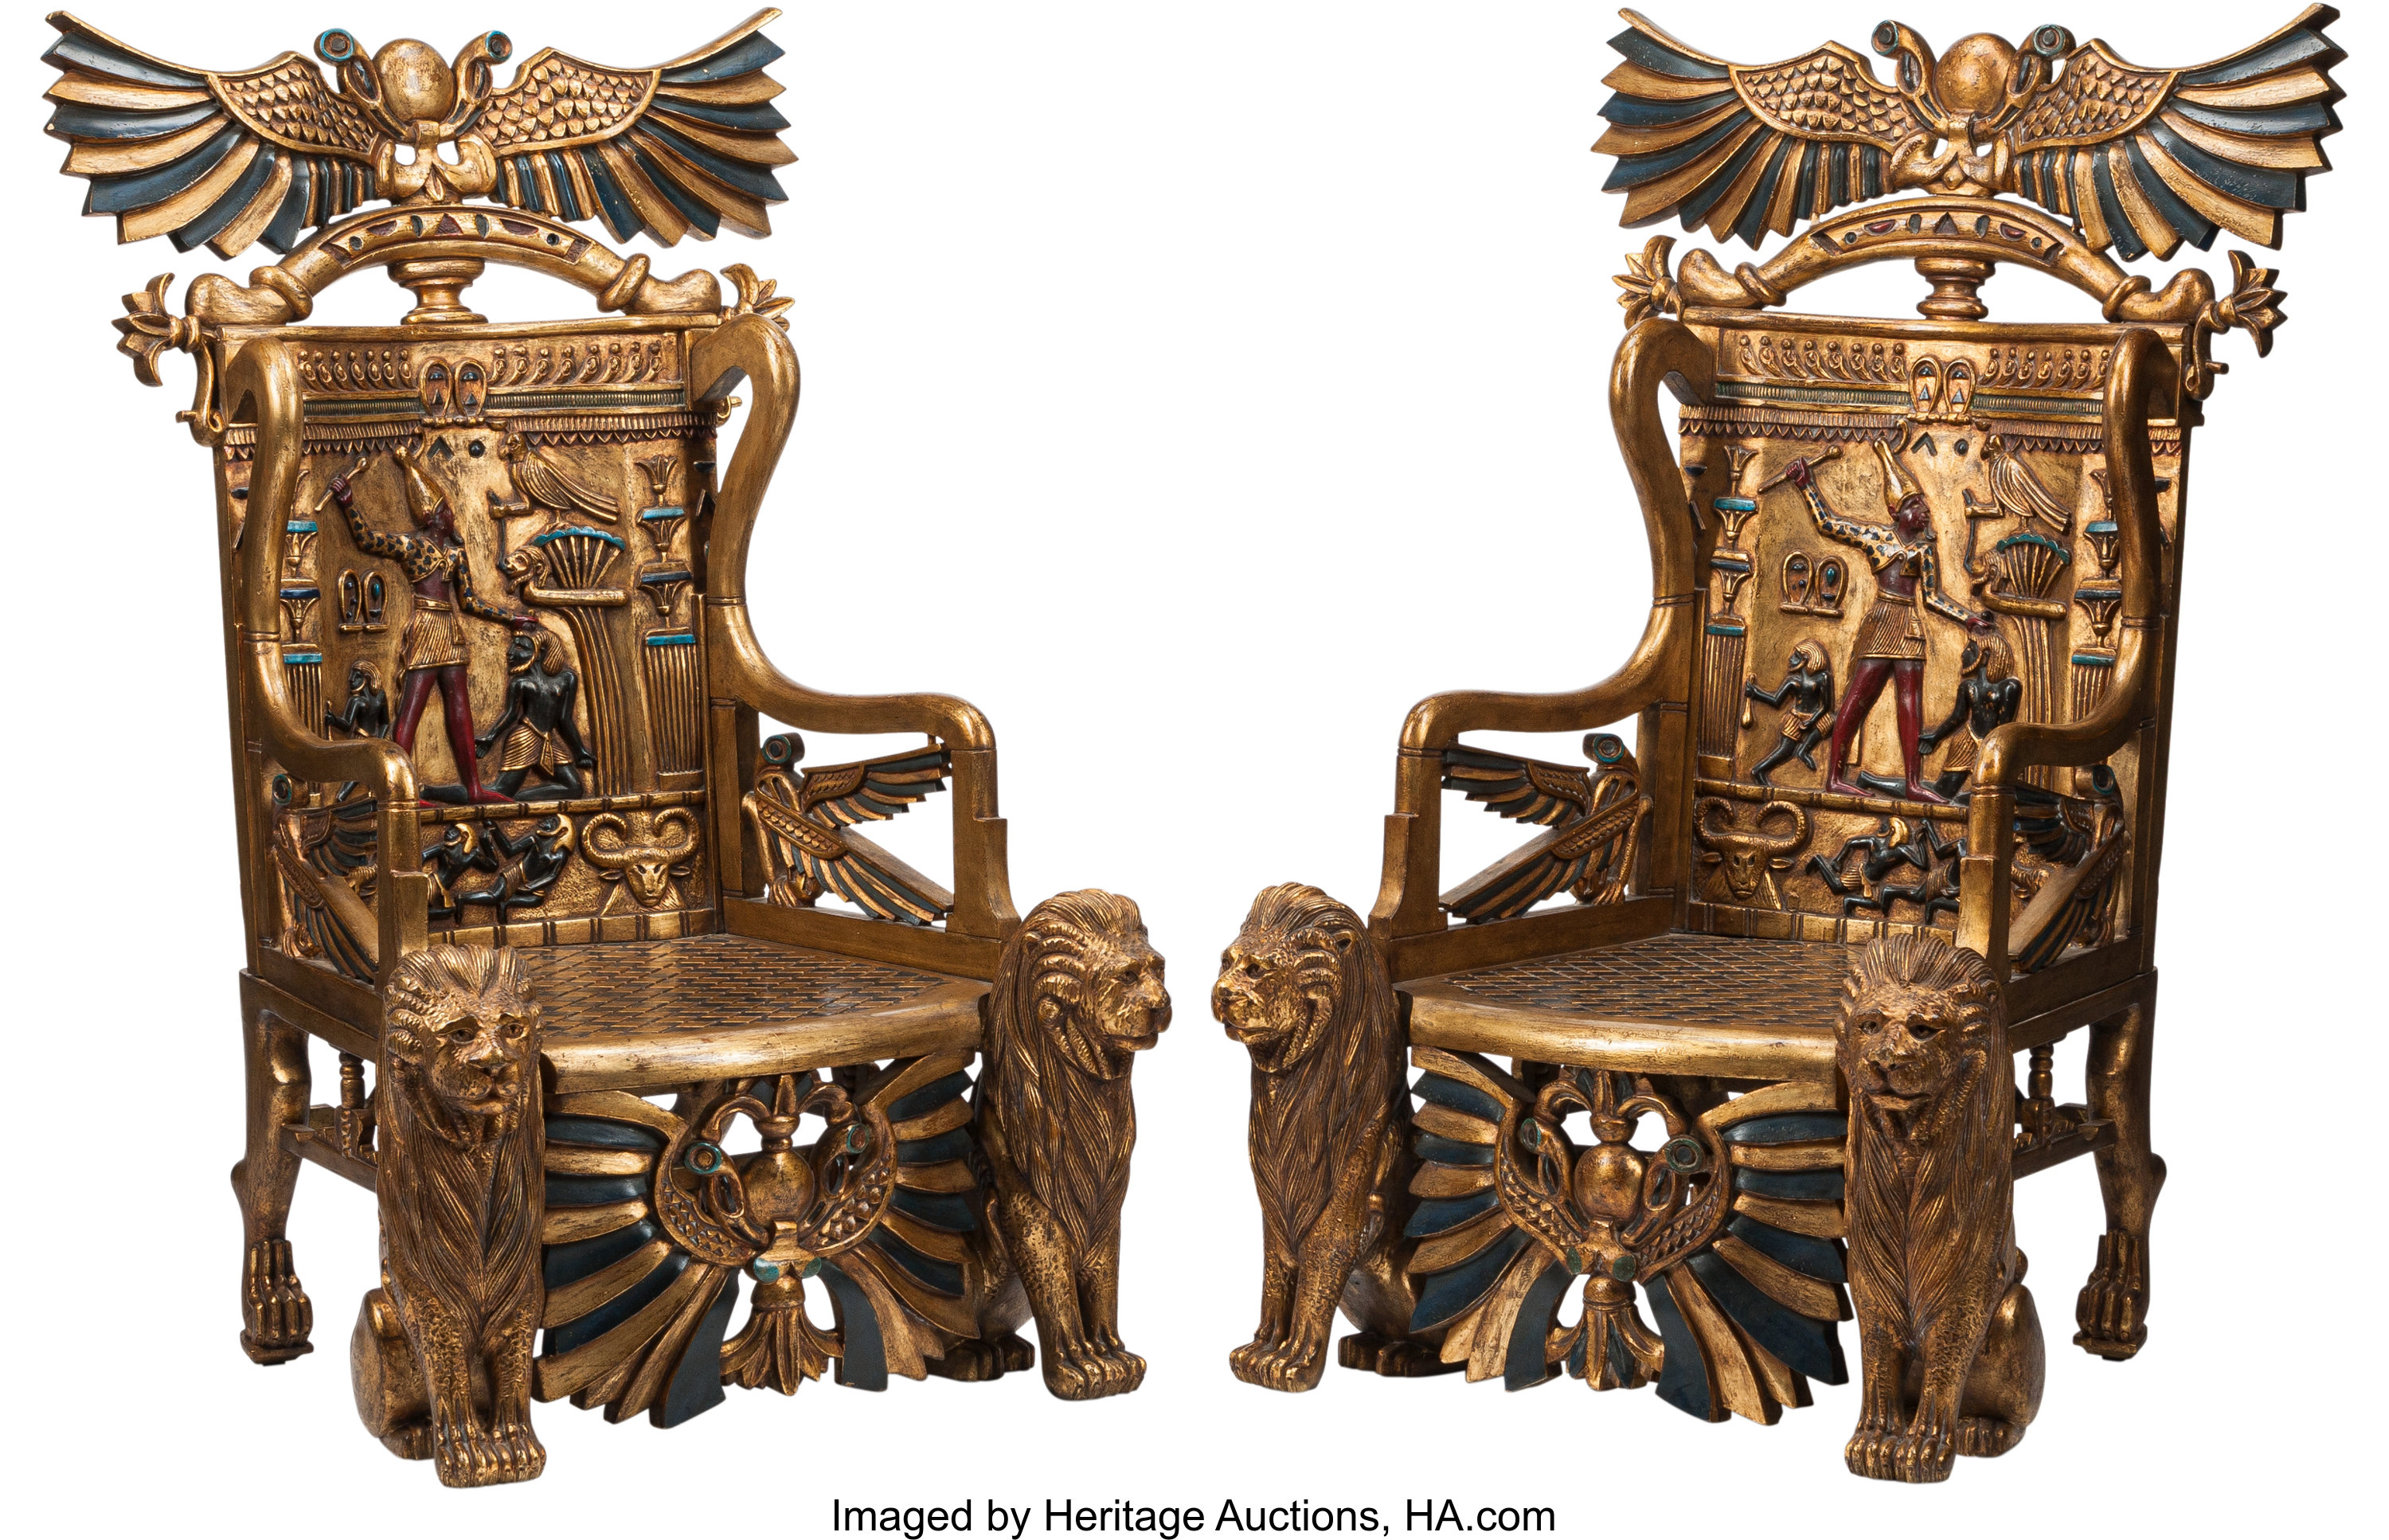 A Pair Of Egyptian Revival Carved And Painted Wood Throne Chairs